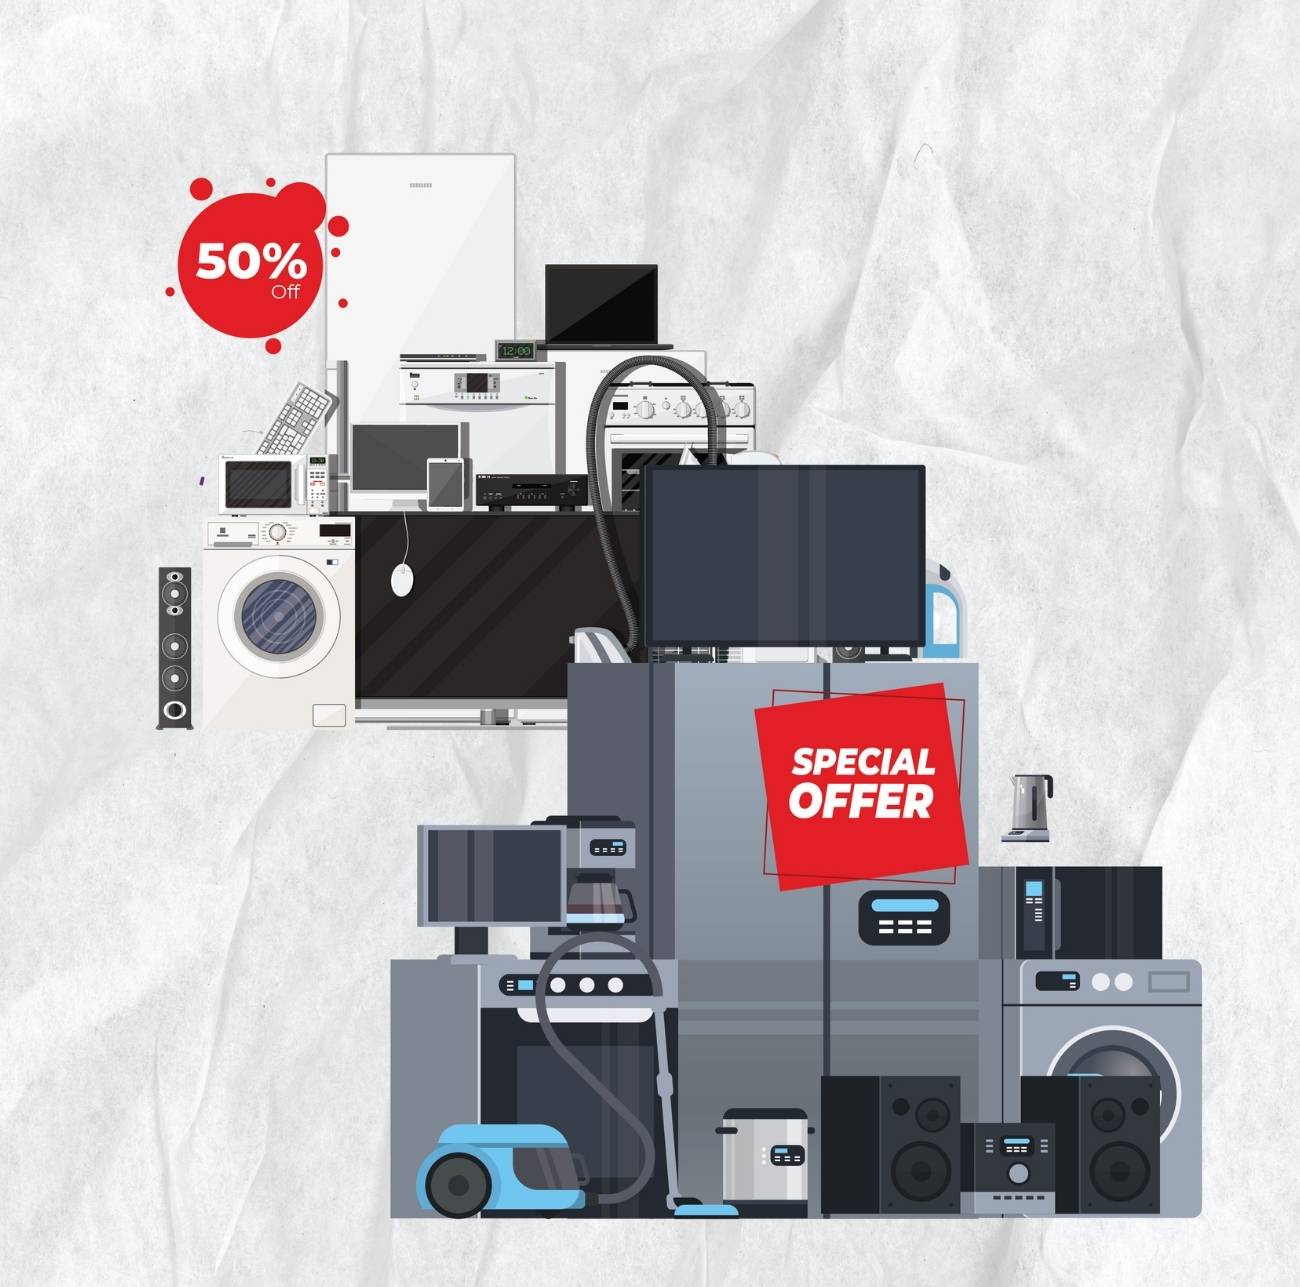 50% off special offer appliances